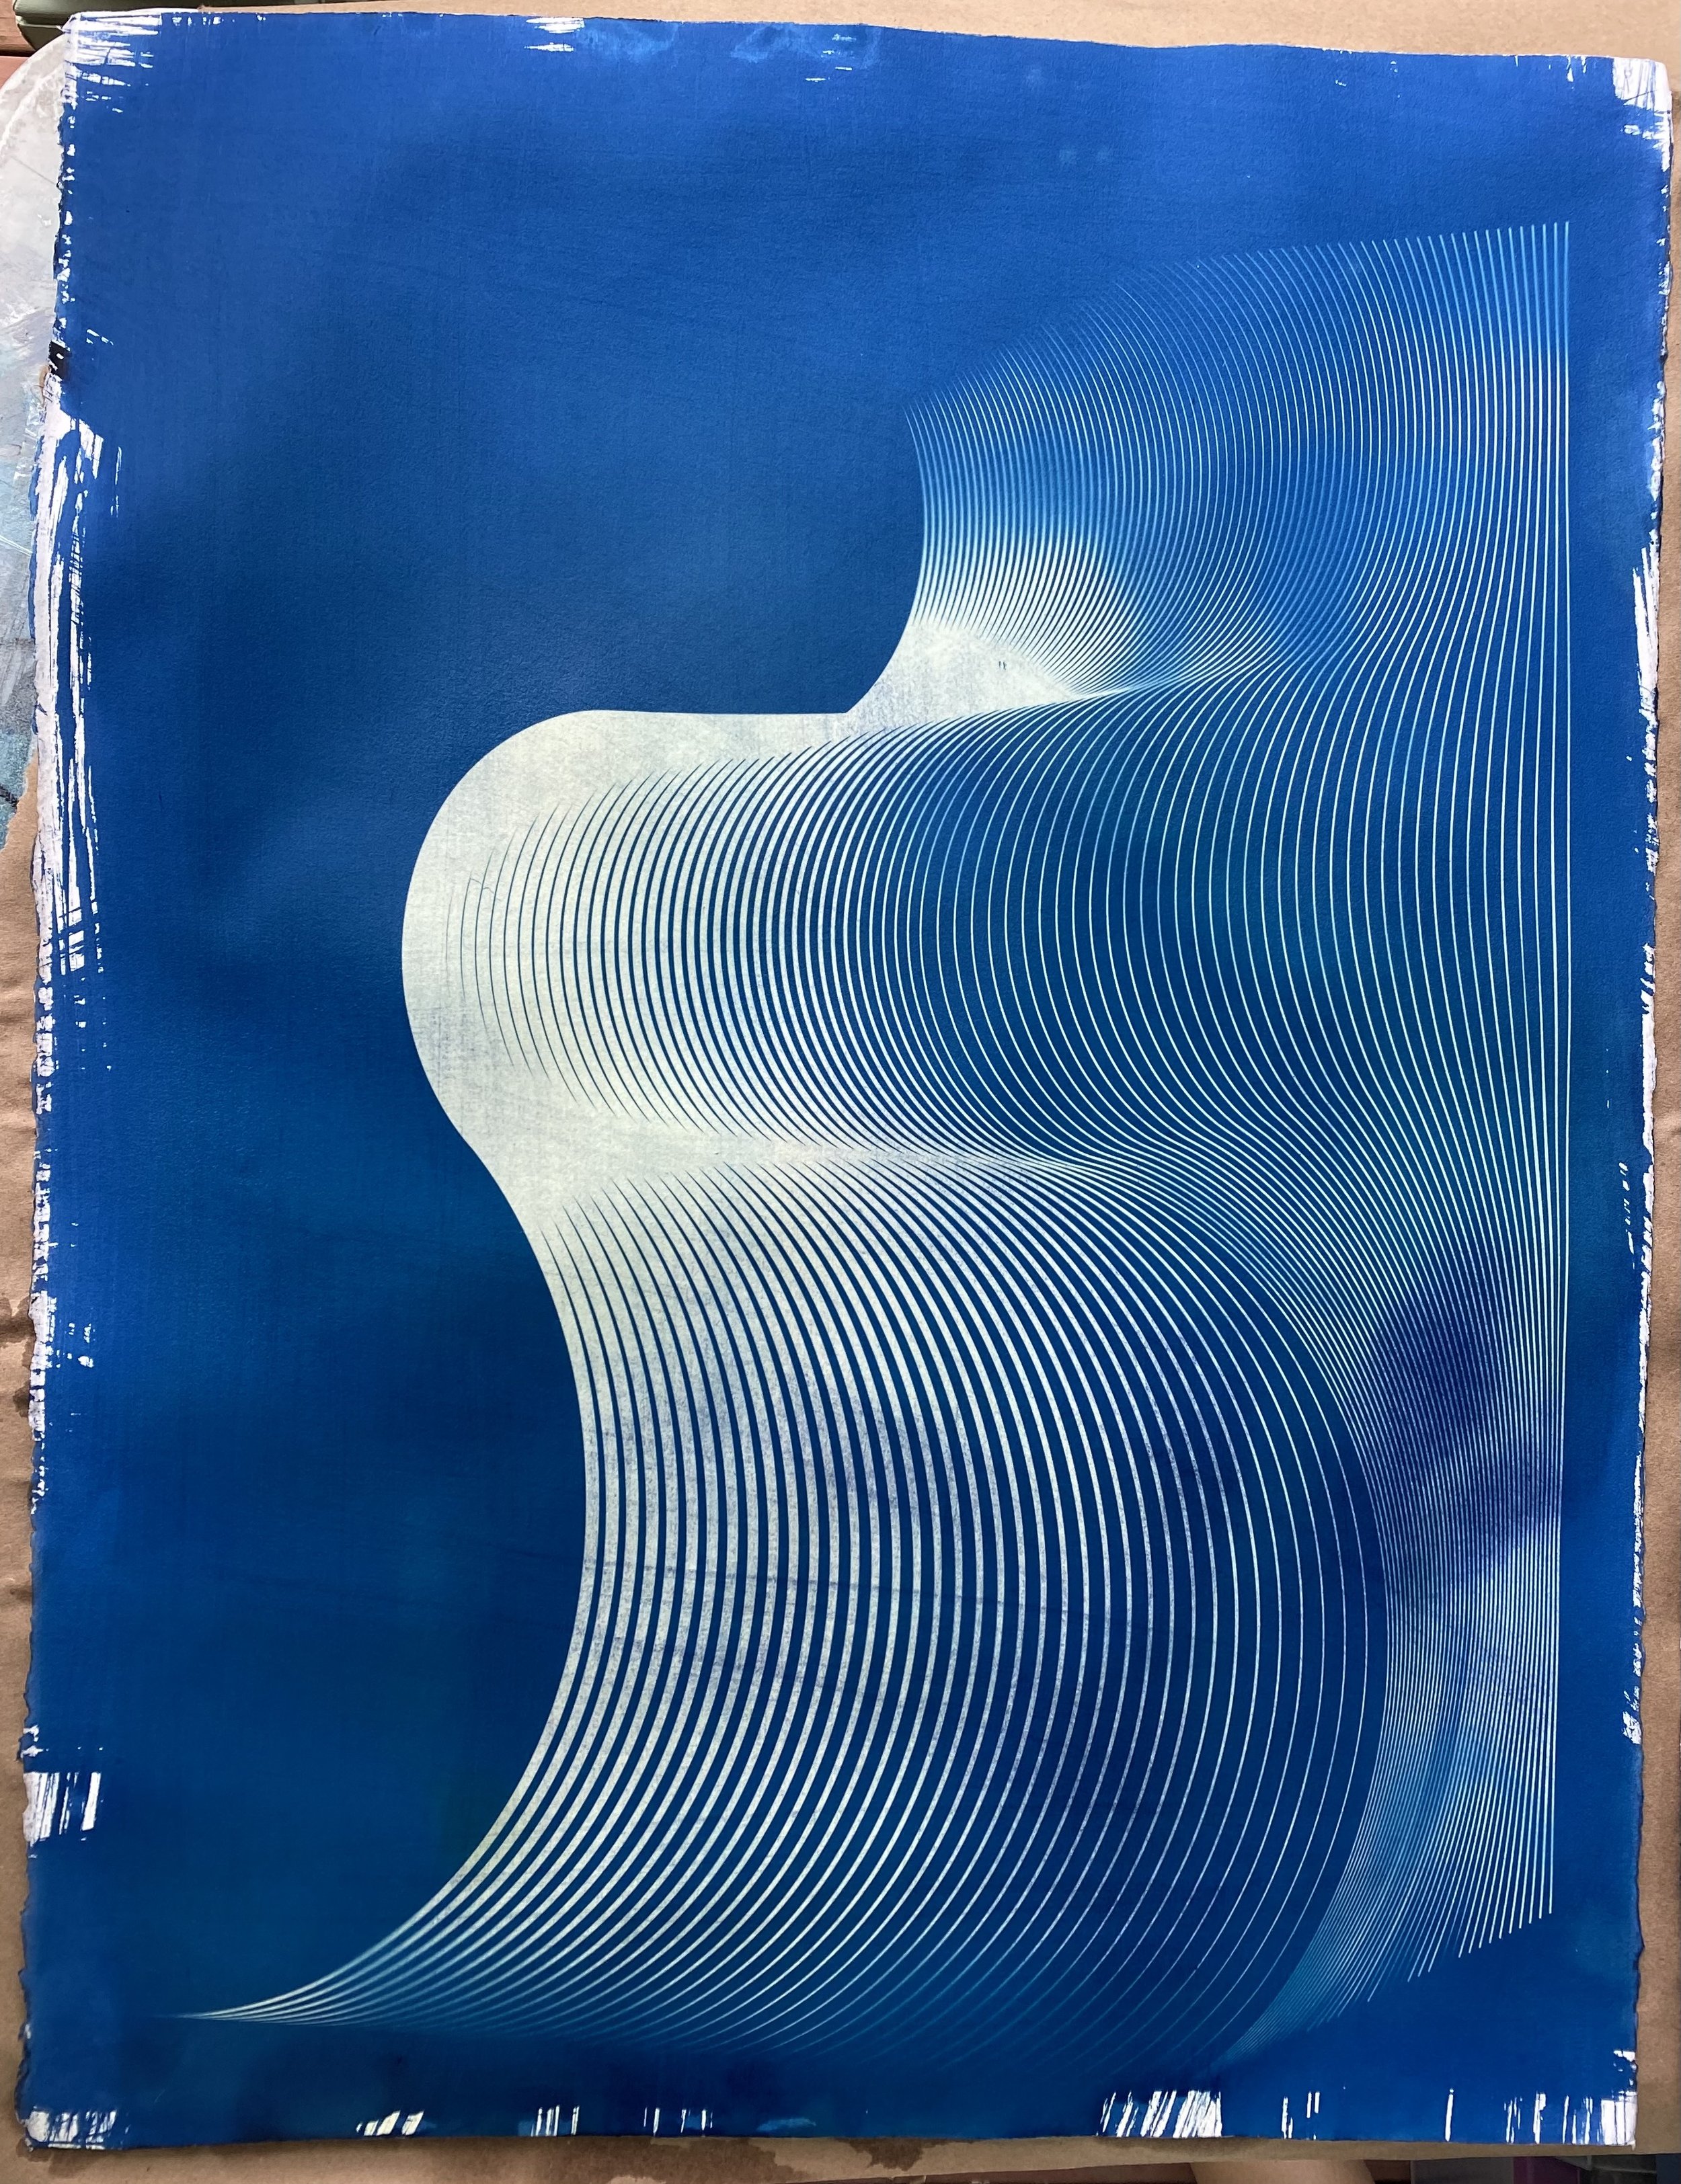    Untitled 4 (from Meditations On perceived Acts Of Violence)  , 2022  Cyanotype on watercolor paper  30 x 23 in. 